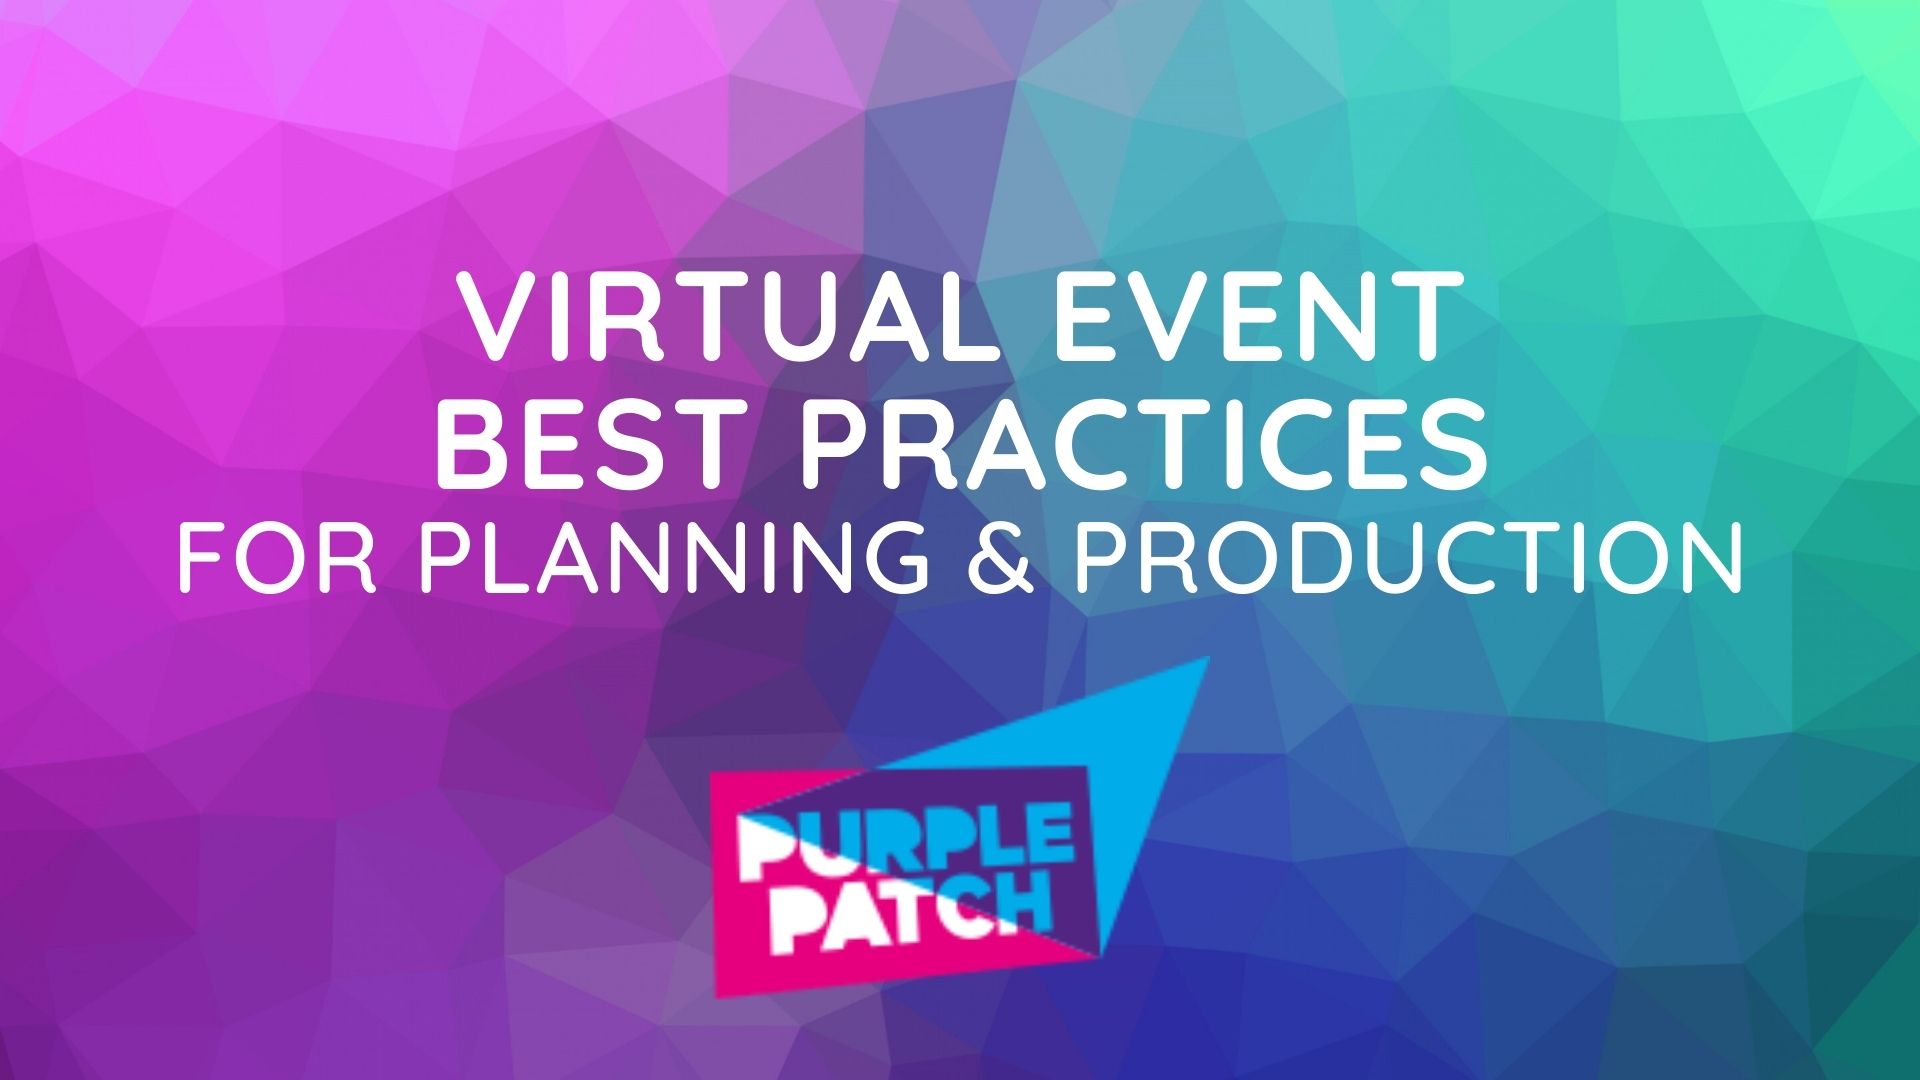 Virtual Event Best Practices for Your Planning & Production